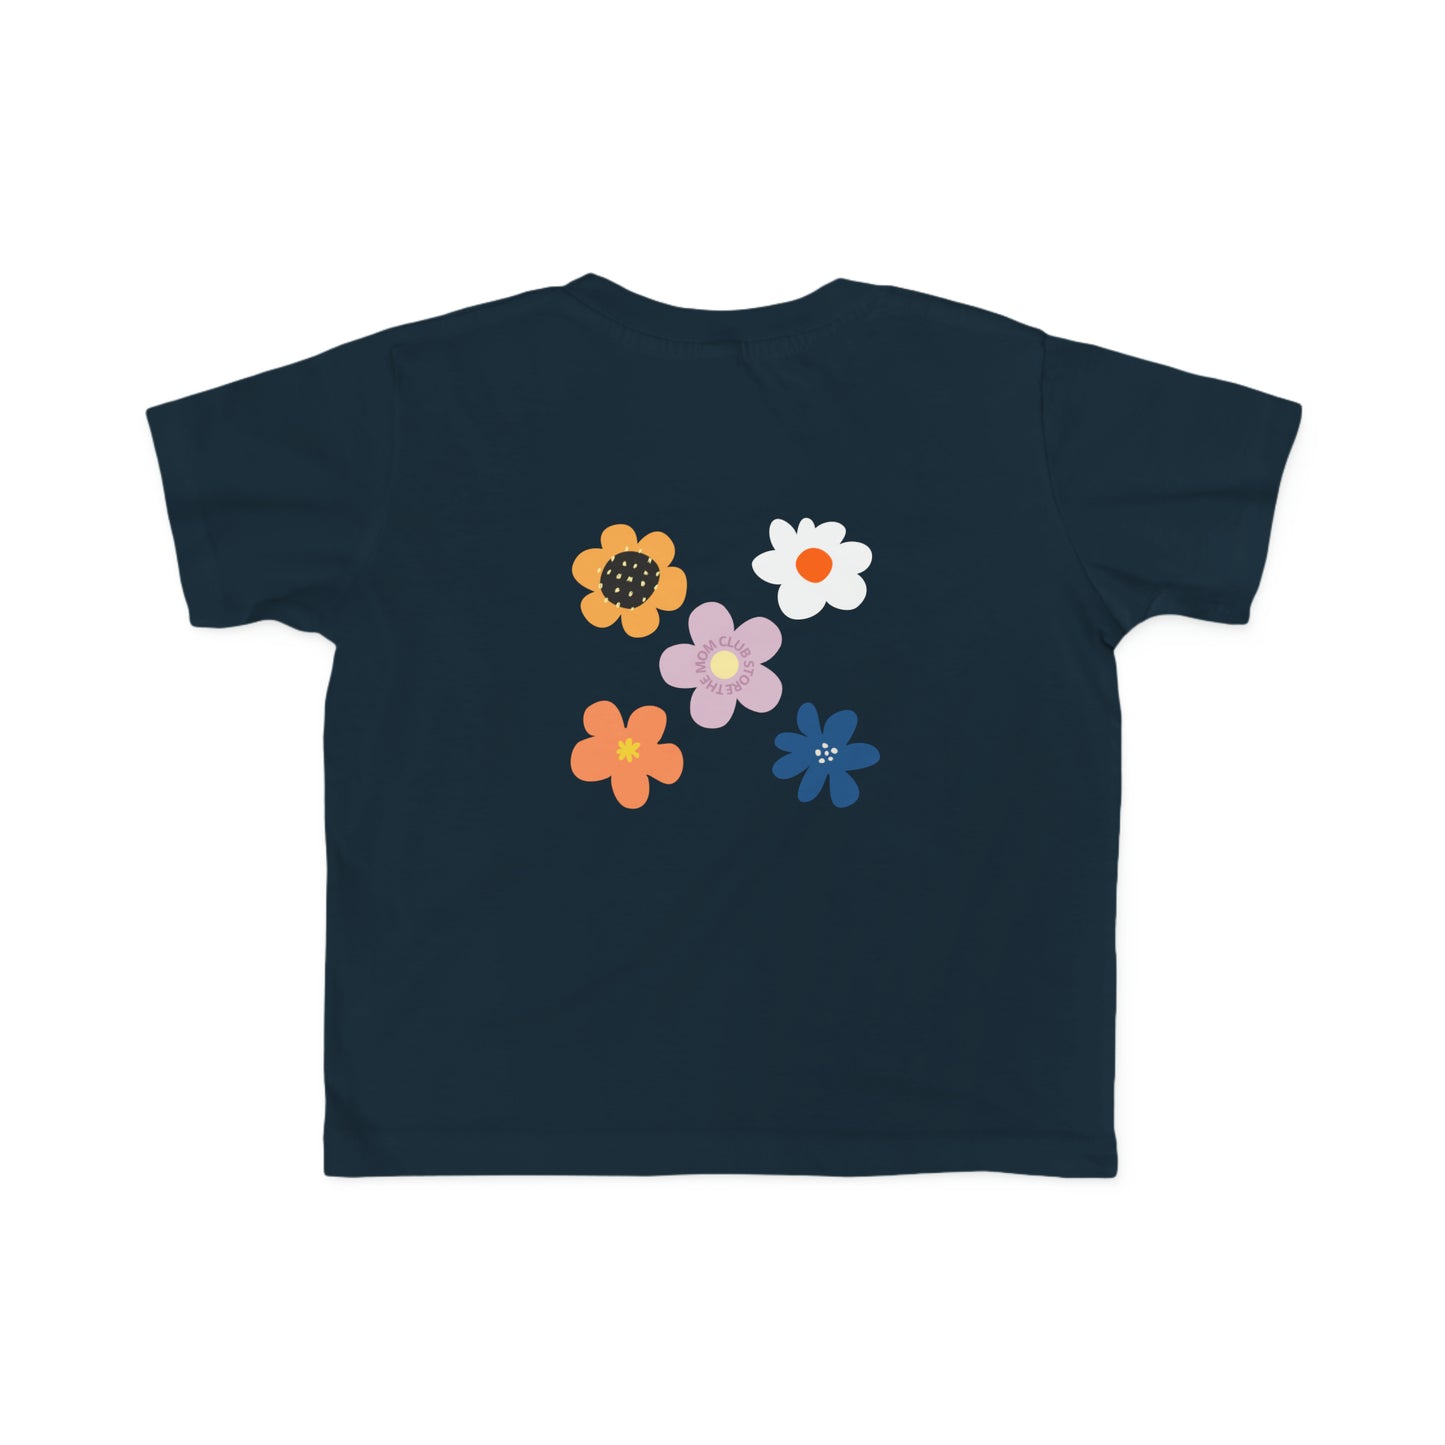 FLOWERS unisex print short-sleeve t-shirt for toddlers